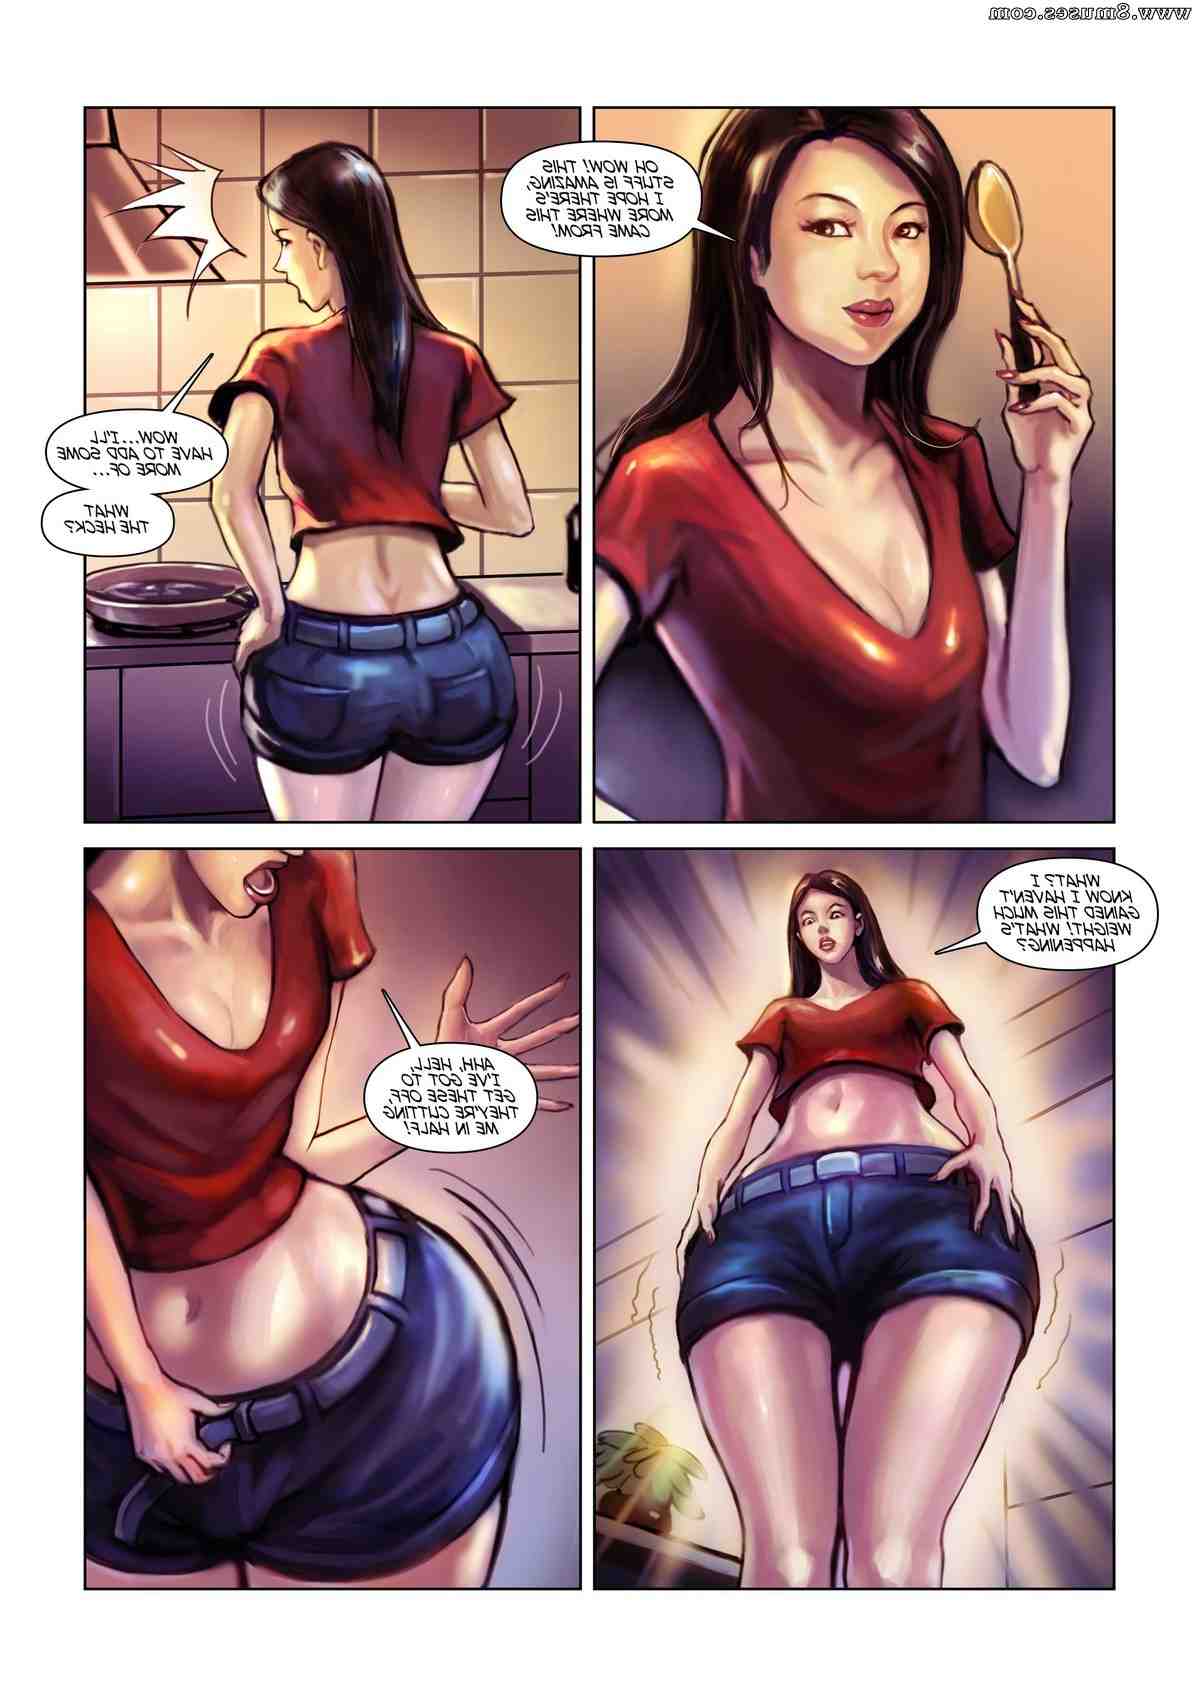 Expansionfan-Comics/Lins-Rounding Lins_Rounding__8muses_-_Sex_and_Porn_Comics_7.jpg